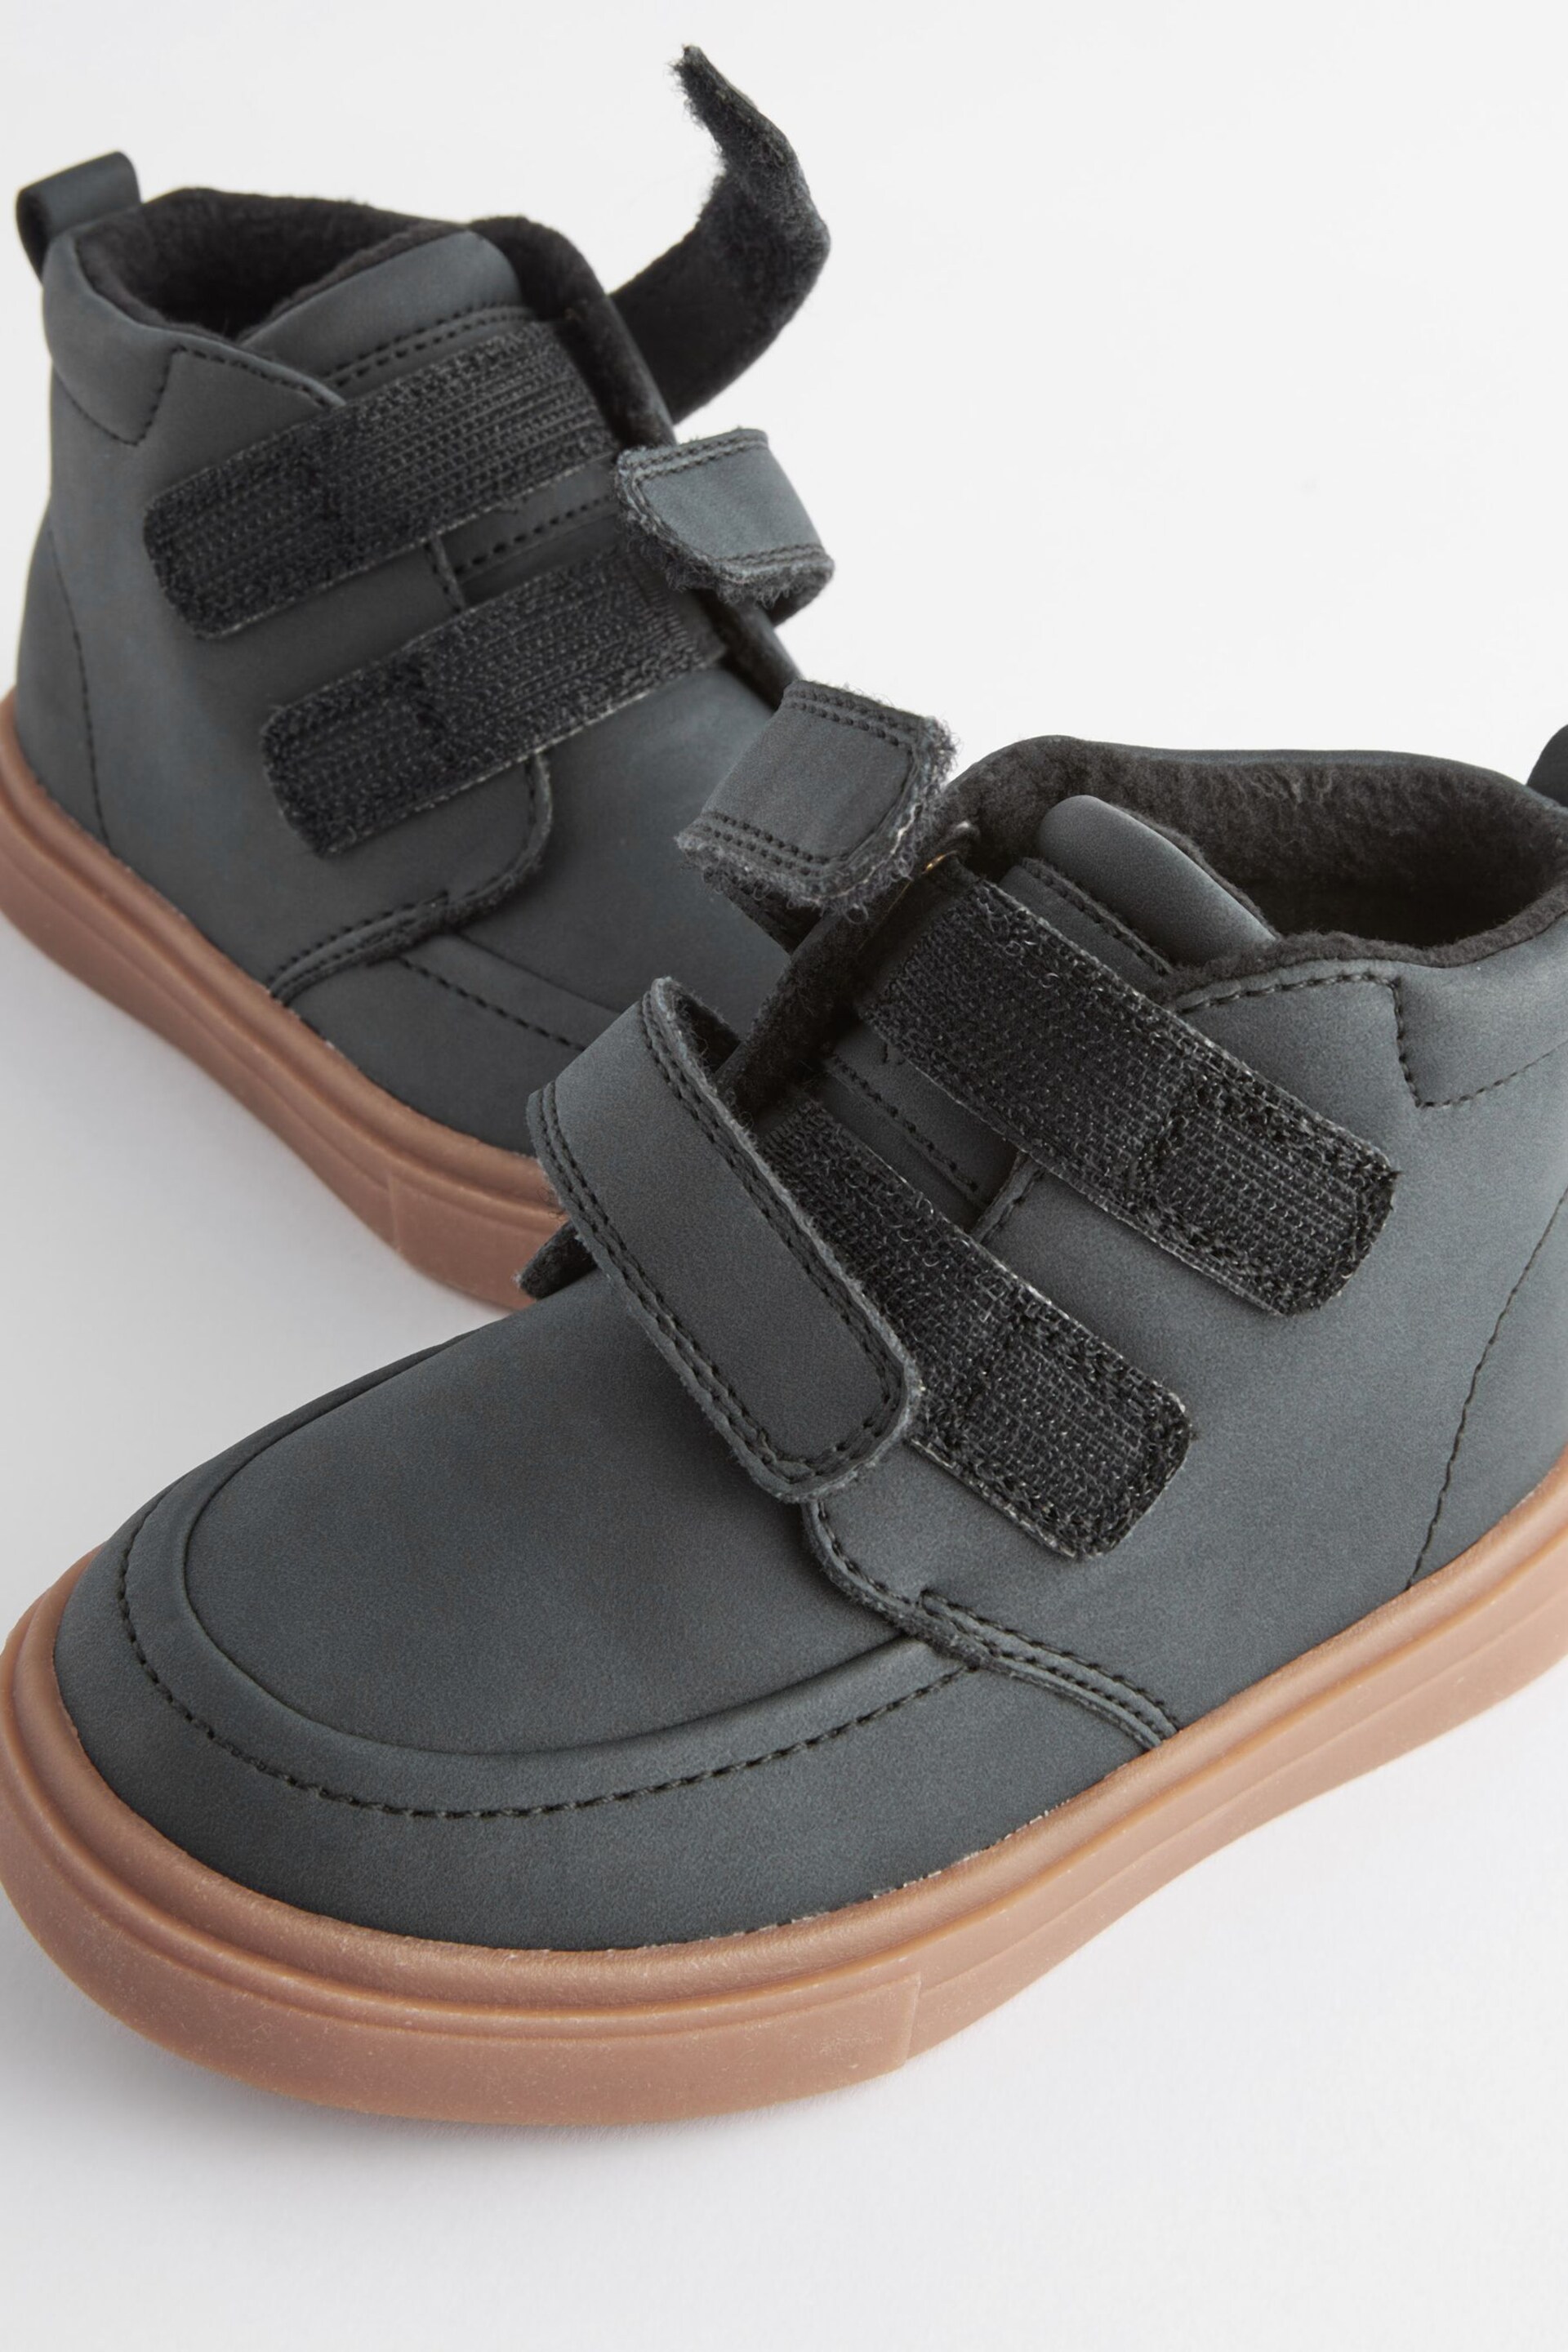 Black with Gum Sole Standard Fit (F) Warm Lined Touch Fastening Boots - Image 5 of 6